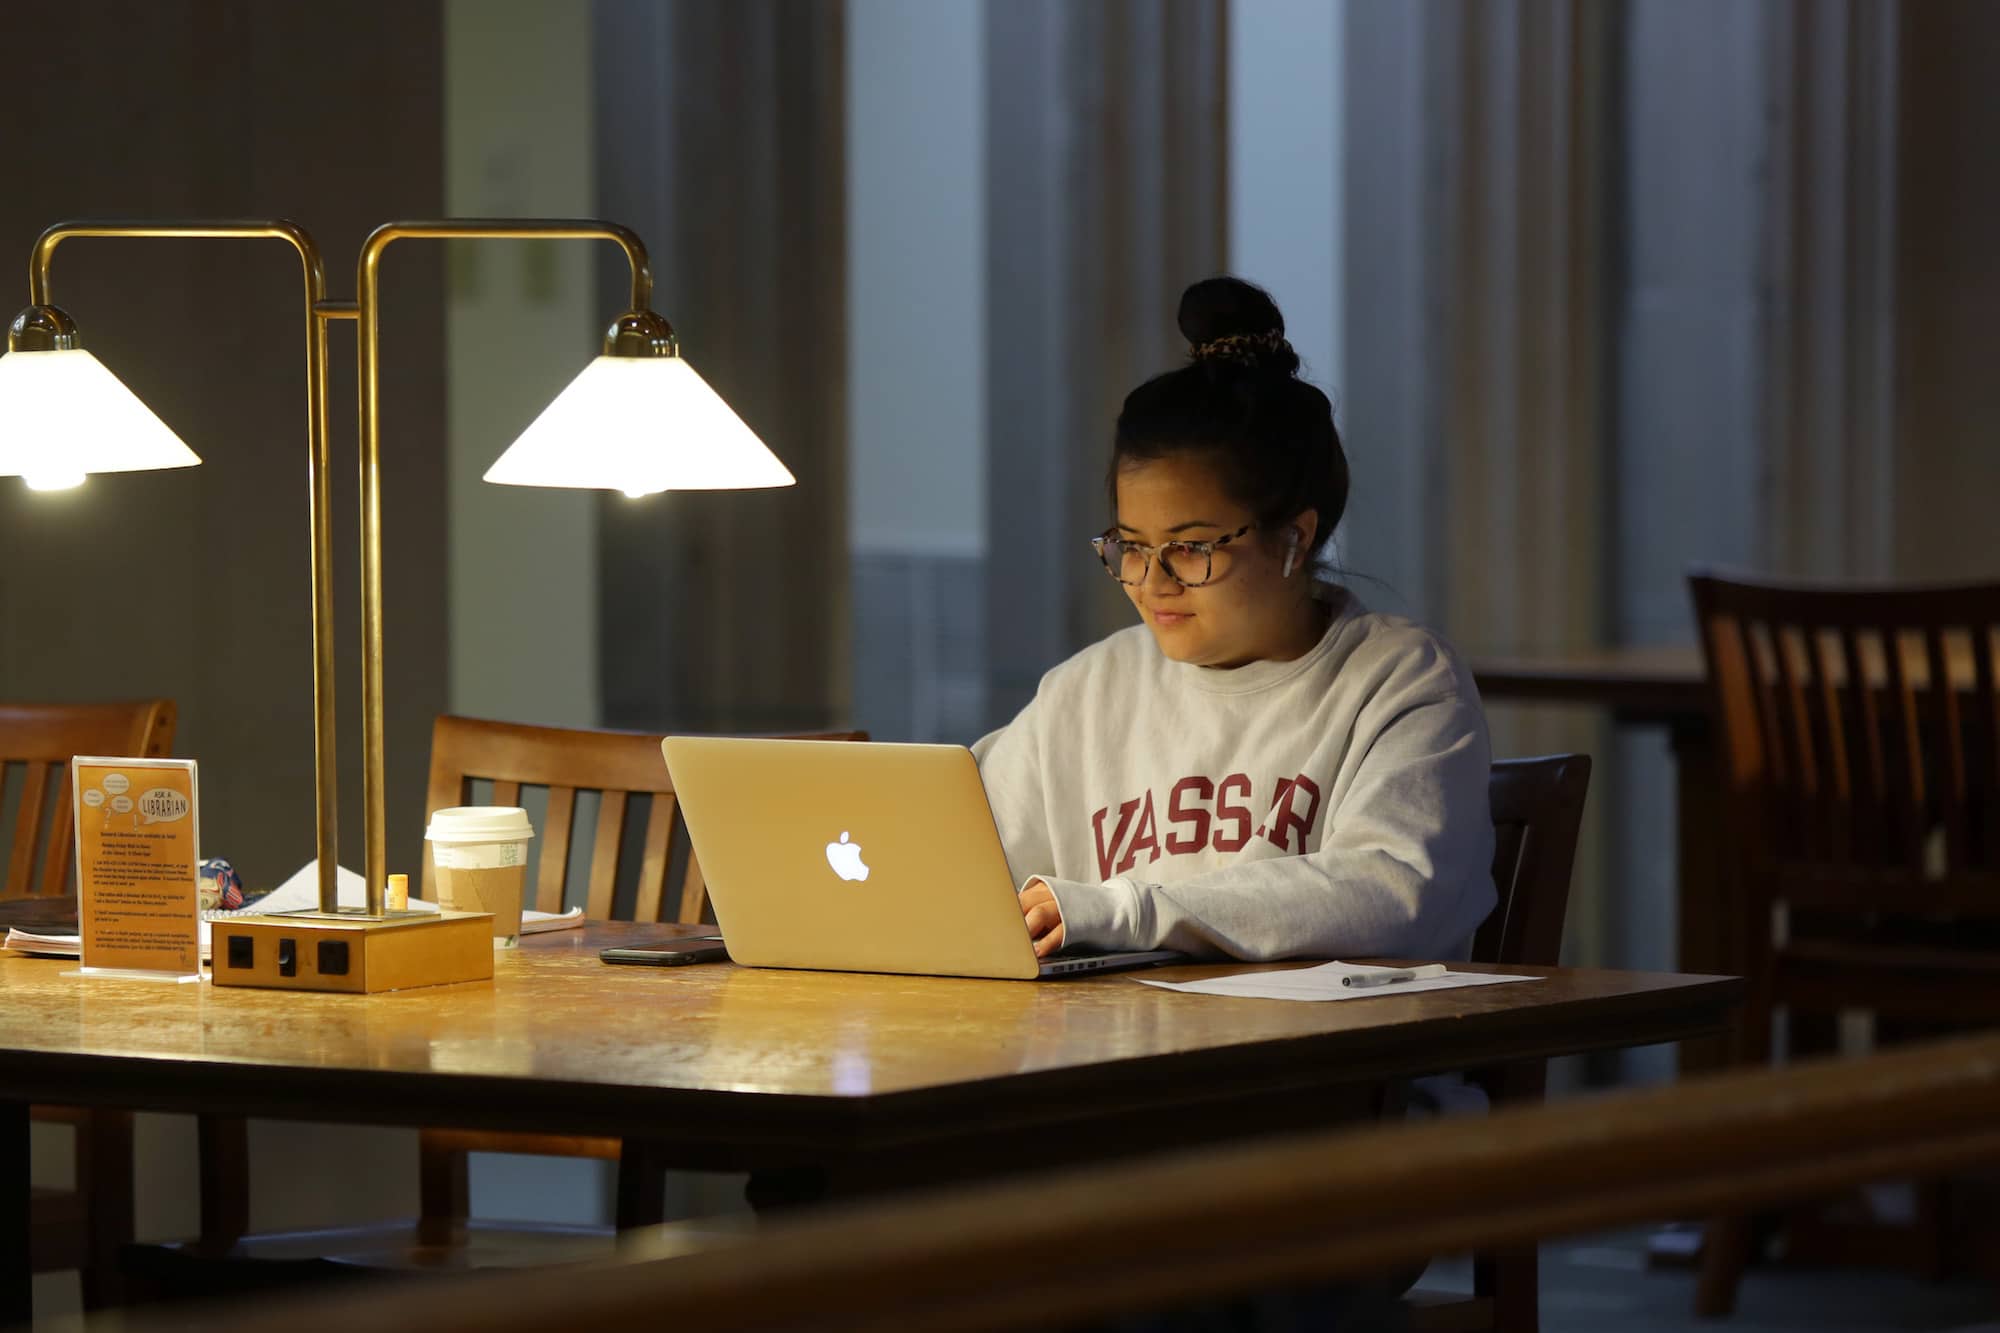 A student wearing a gray Vassar sweatshirt sits at a table and works on a laptop.